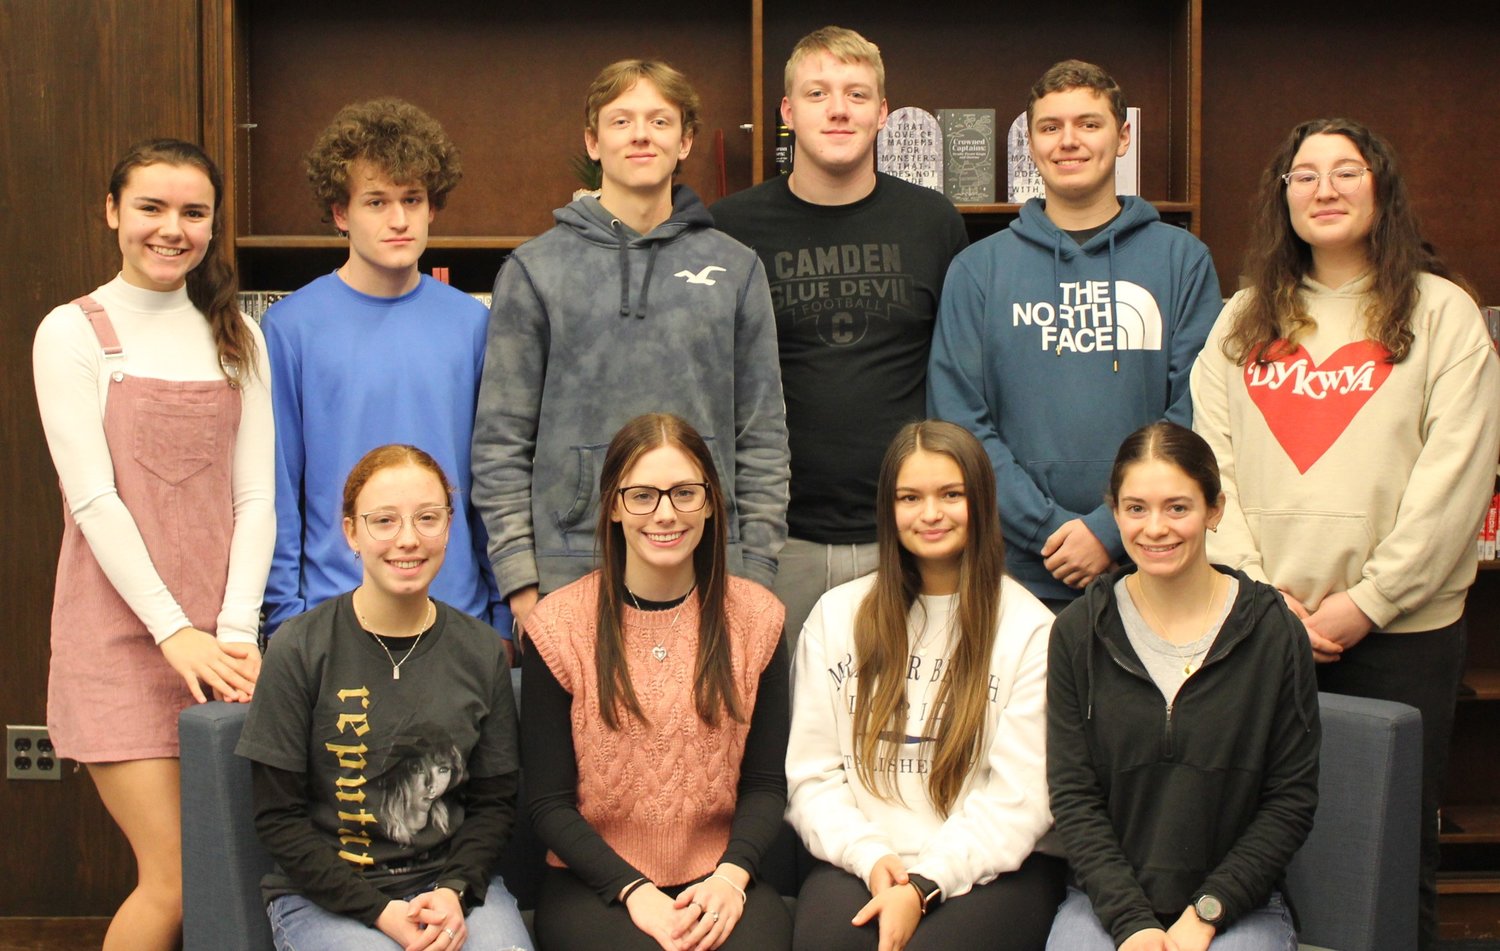 Members of the Top 10 academically in the Camden High School’s Class of 2023 pause from their studies for a quick photo. They include, from left, front row: Morgan Keil, Erica Zike, Marina Mikhaylyuk, and Katie Hite; back row: Jacey Hinds, Connor Perrotta, Jerome Seidl, Connor MacArthur, Koen Turner, and Marjorie Castilla.